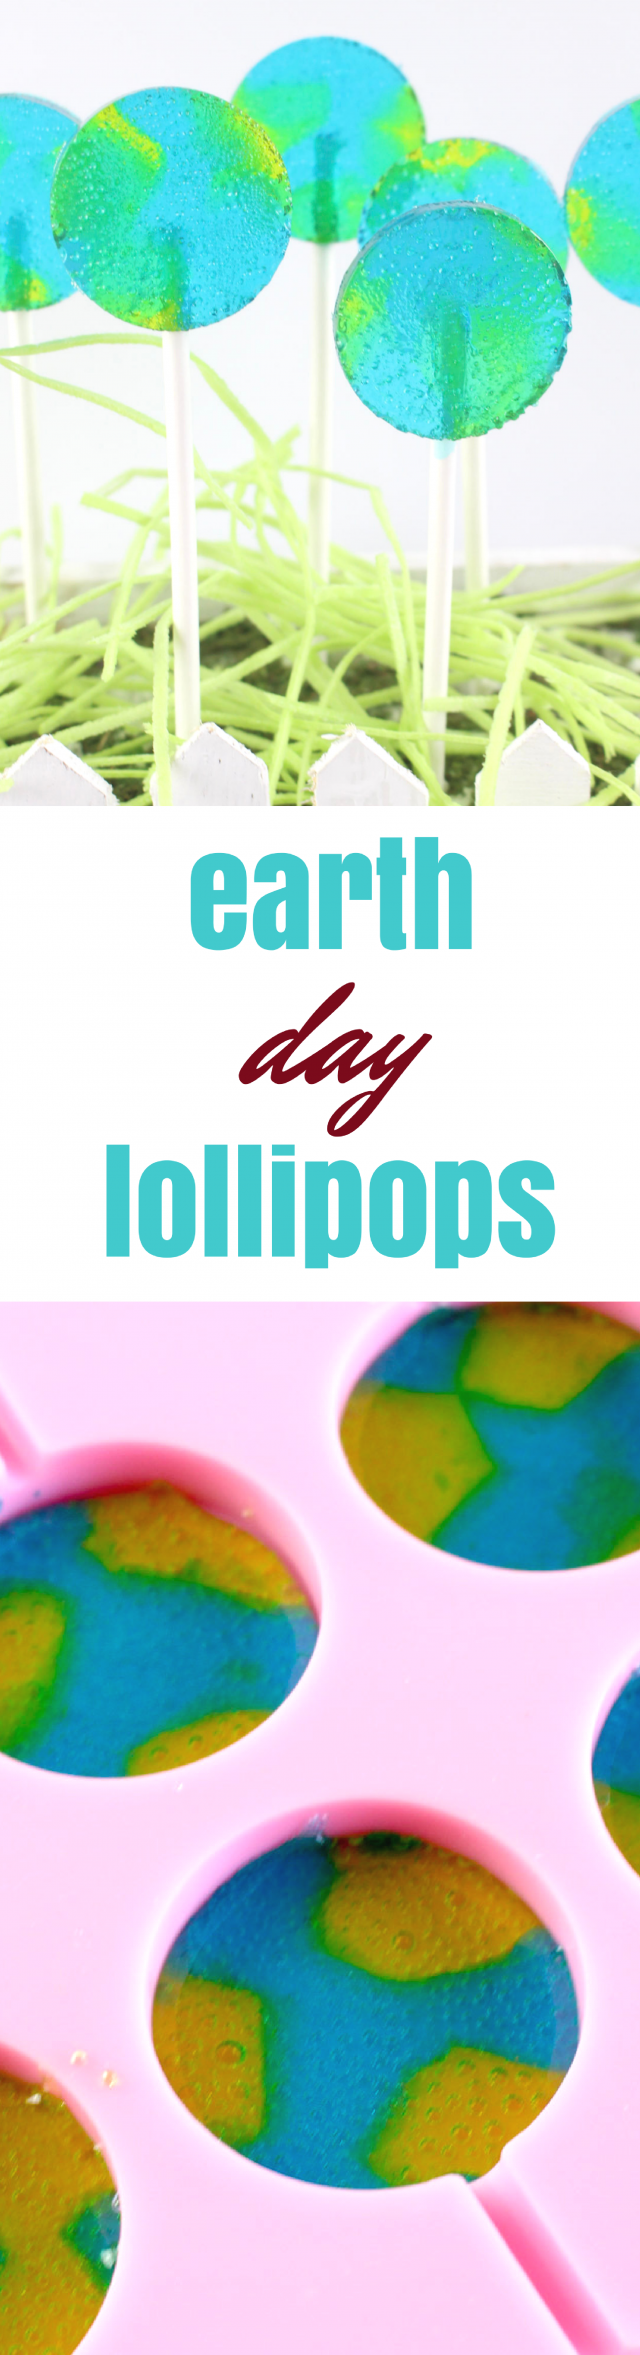 Earth Day is coming up soon, so we wanted to put something fun together for this special day. We think your kids will love it, too. Earth Day lollipops! 